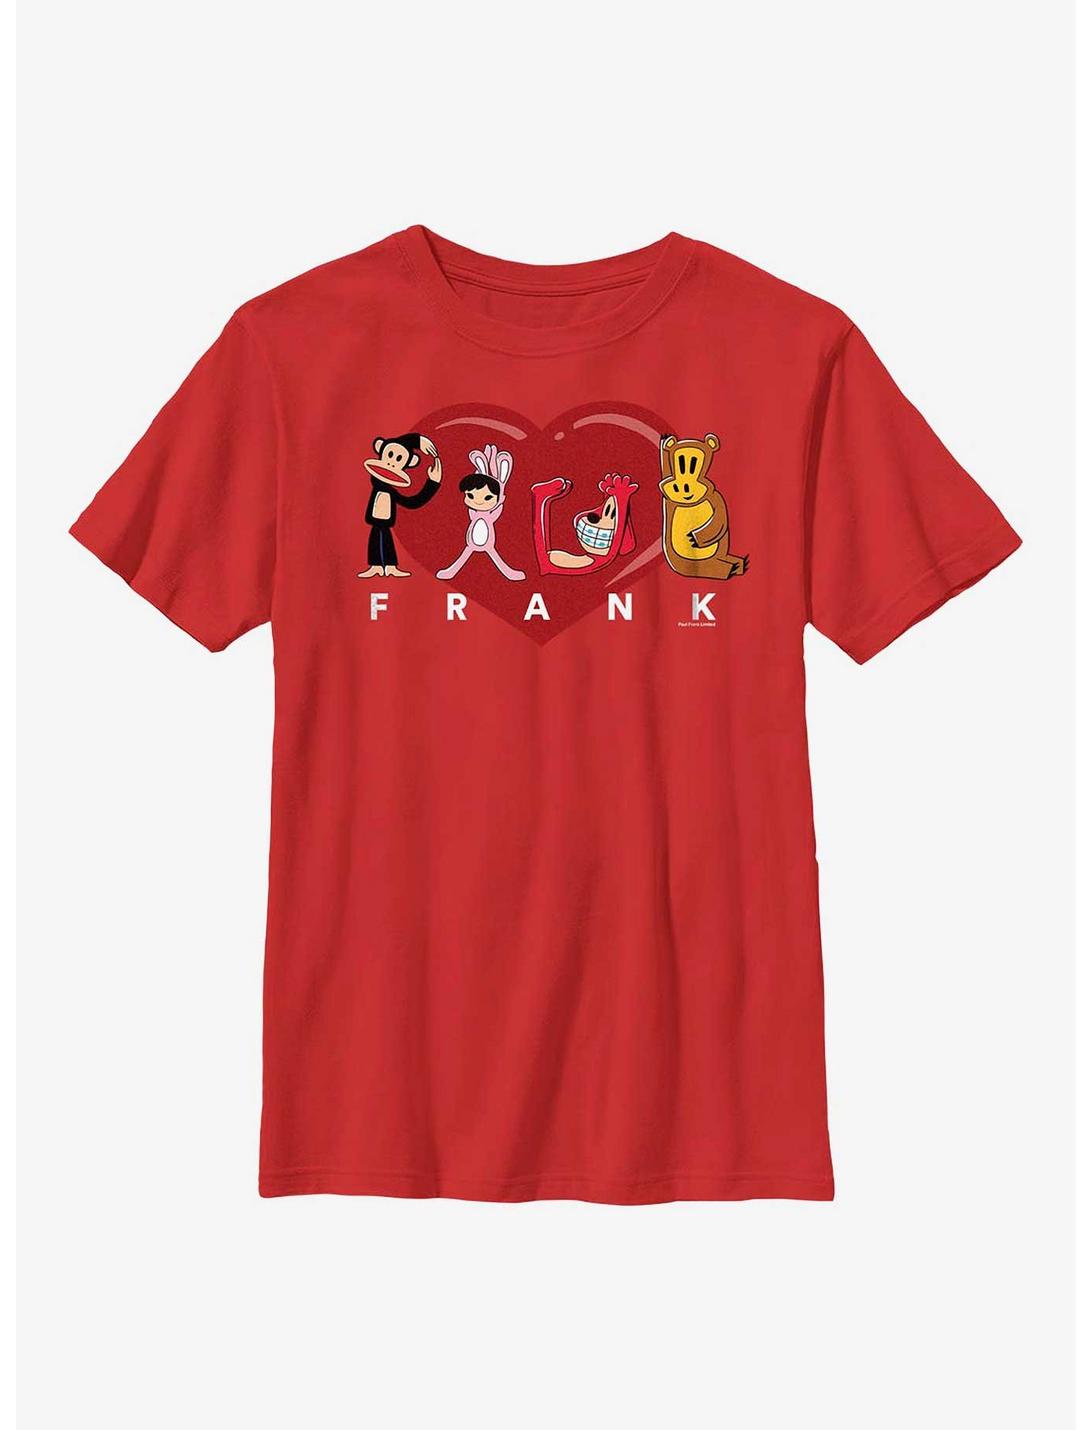 Paul Frank Love Frank Characters Youth T-Shirt, RED, hi-res